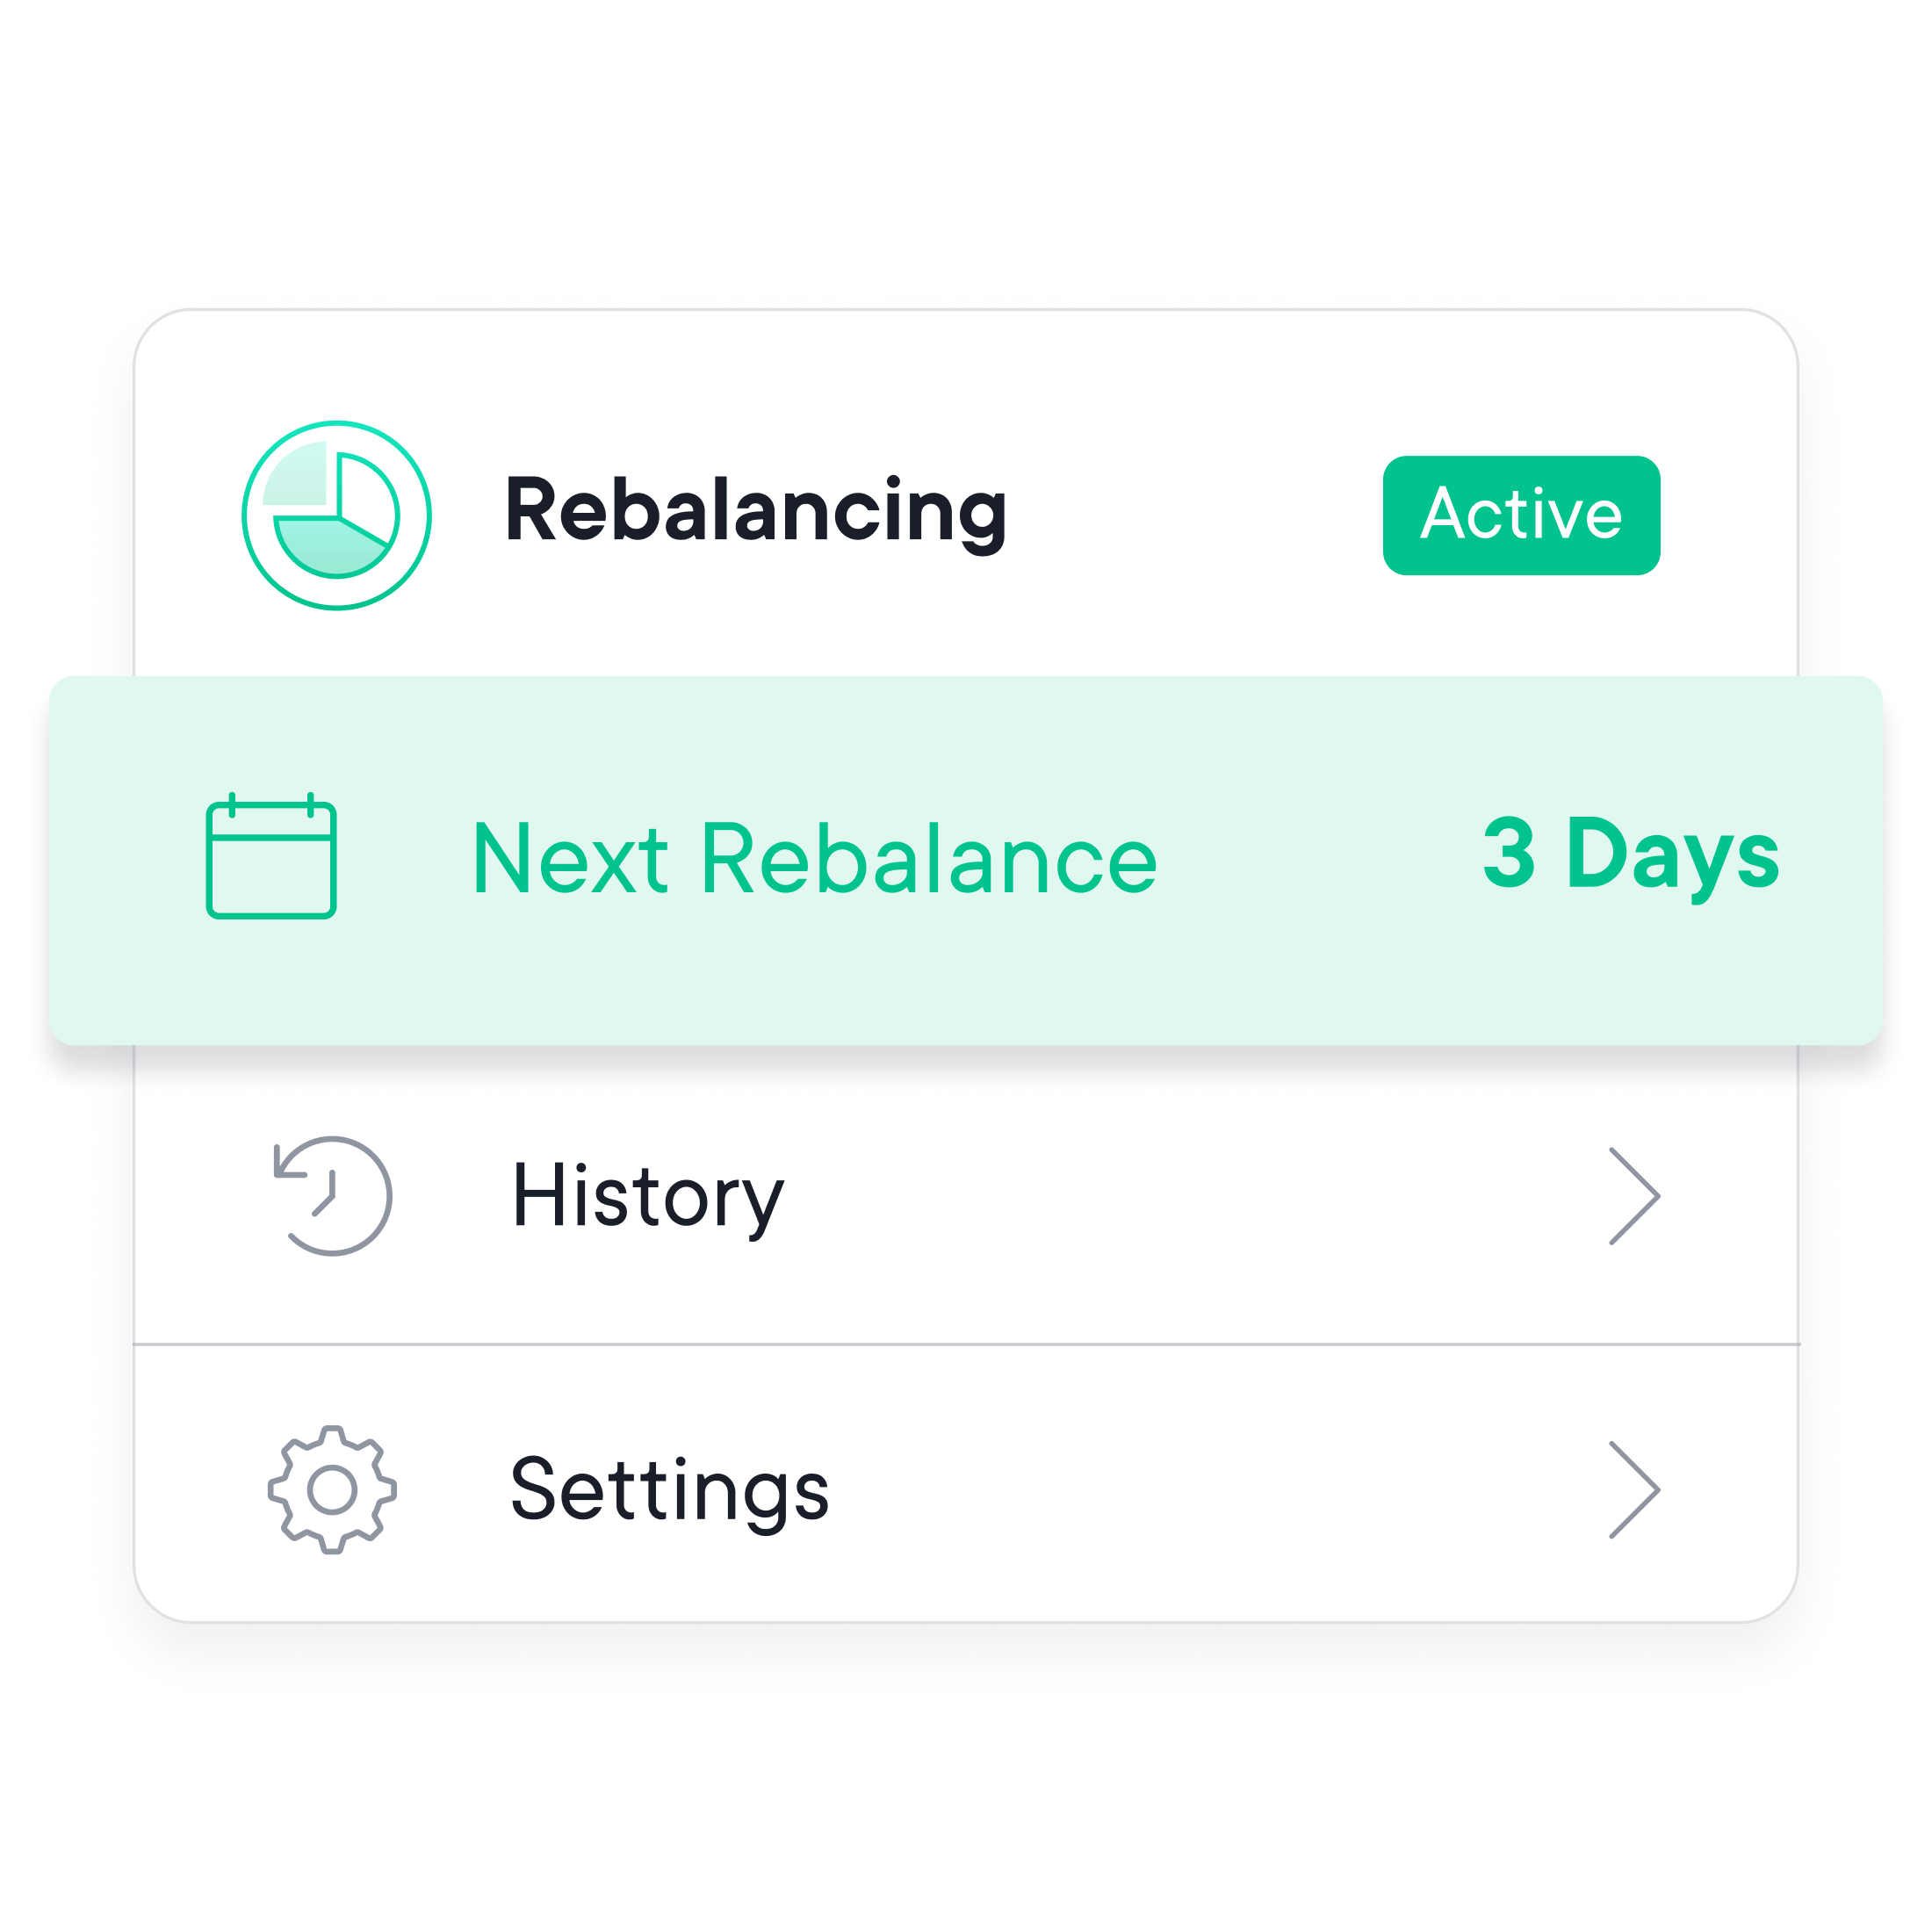 Benefit from the power of rebalancing